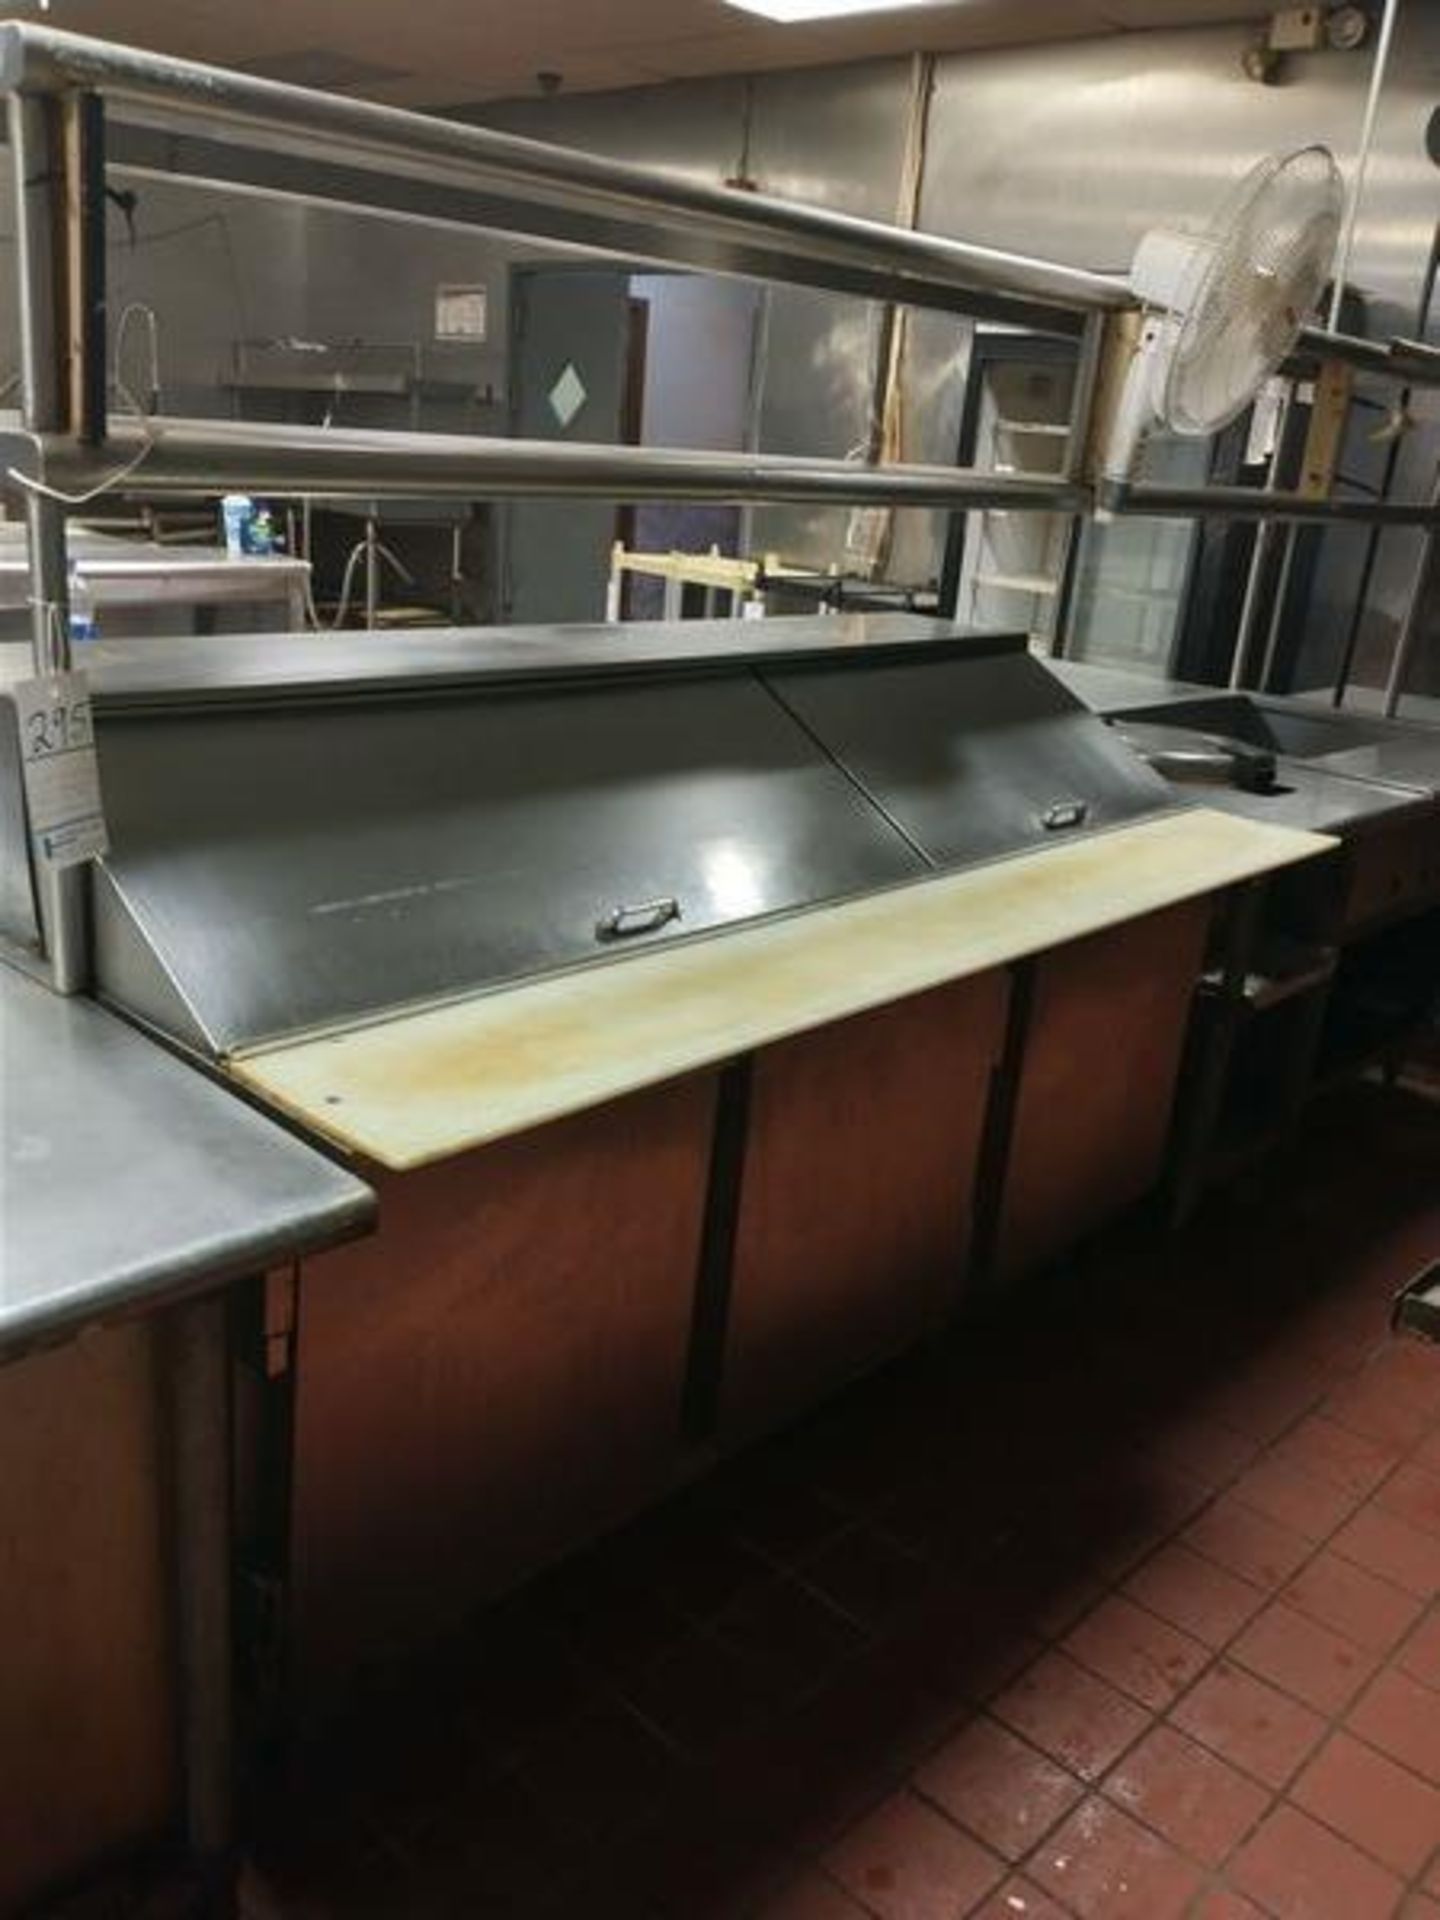 11' X 36" REFRIGERATED SANDWICH TABLE AND 6' RICE COOKING UNIT WITH DRYBIN AND OVEN SHELVES